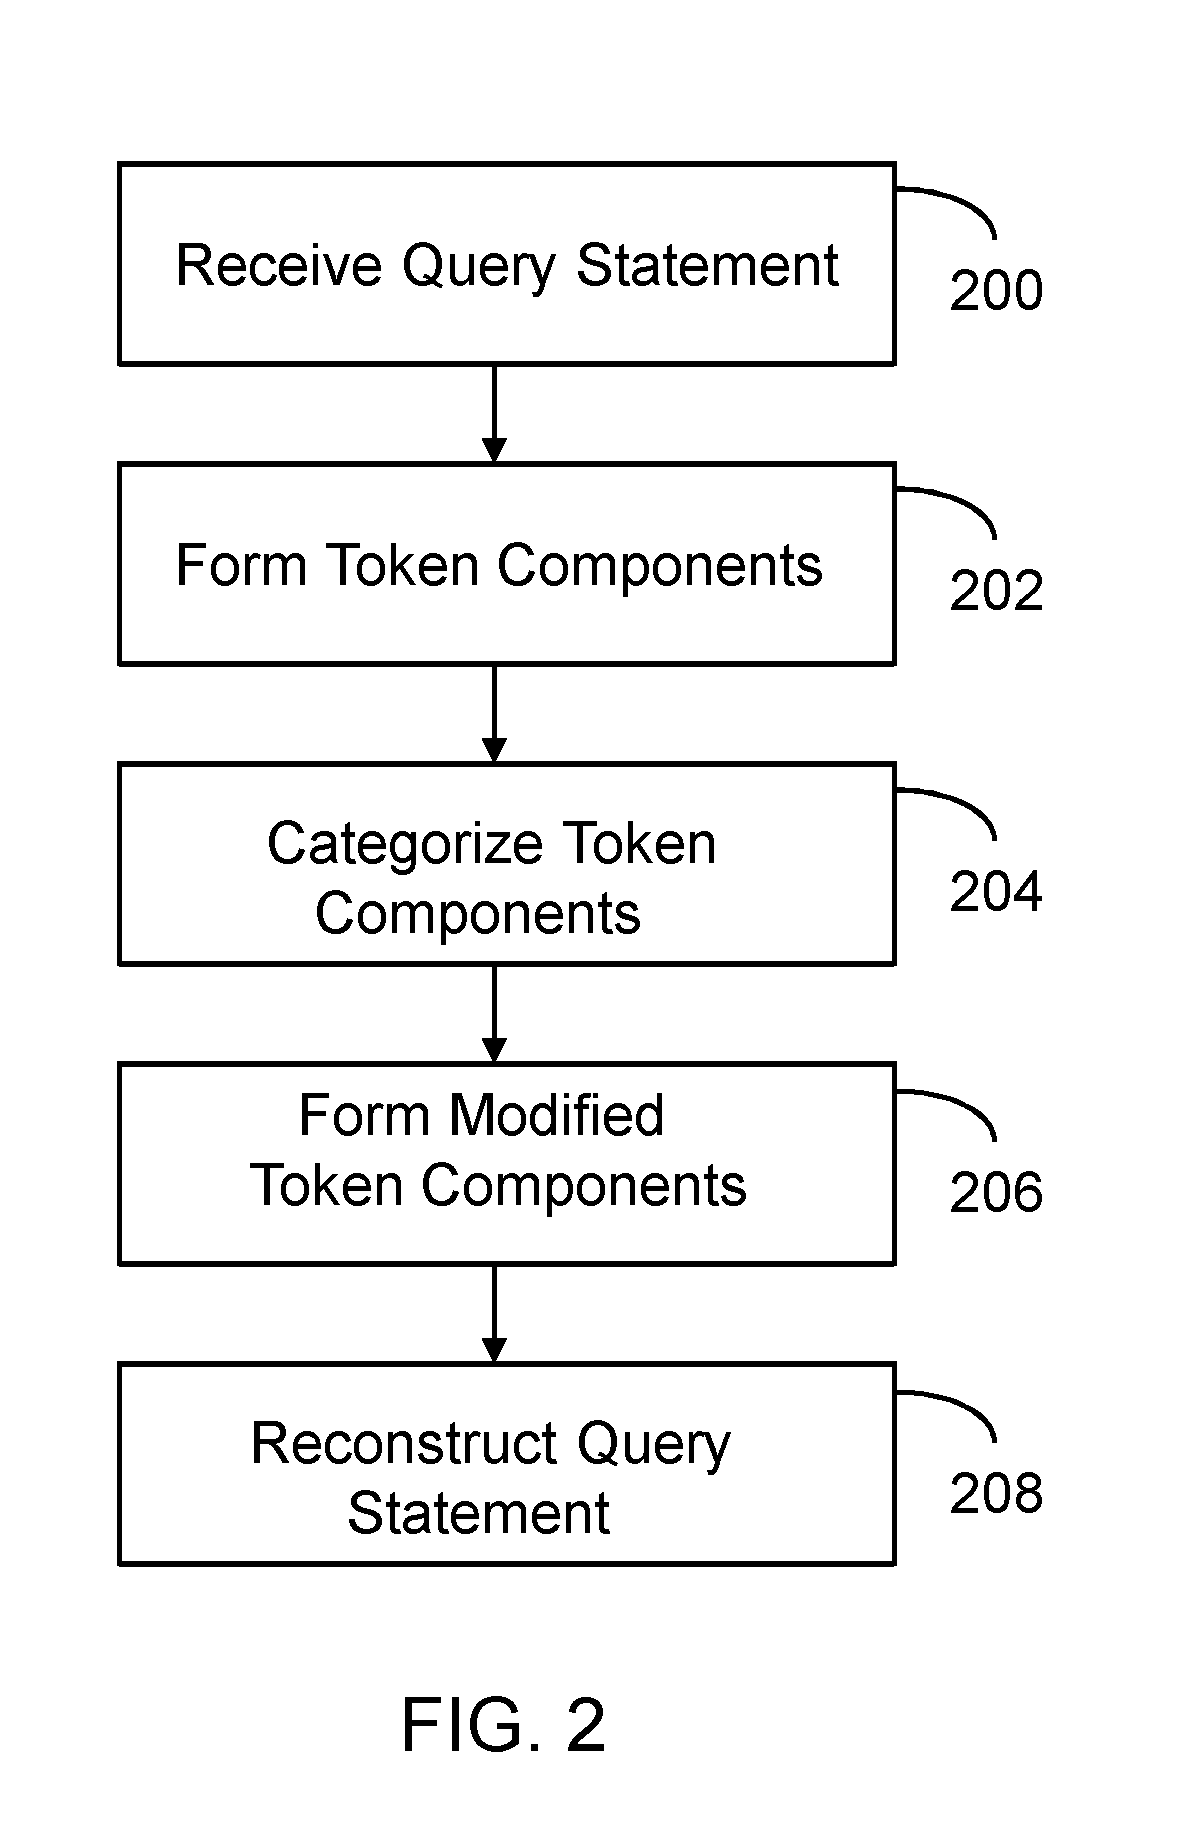 Distributed Storage and Distributed Processing Query Statement Reconstruction in Accordance with a Policy